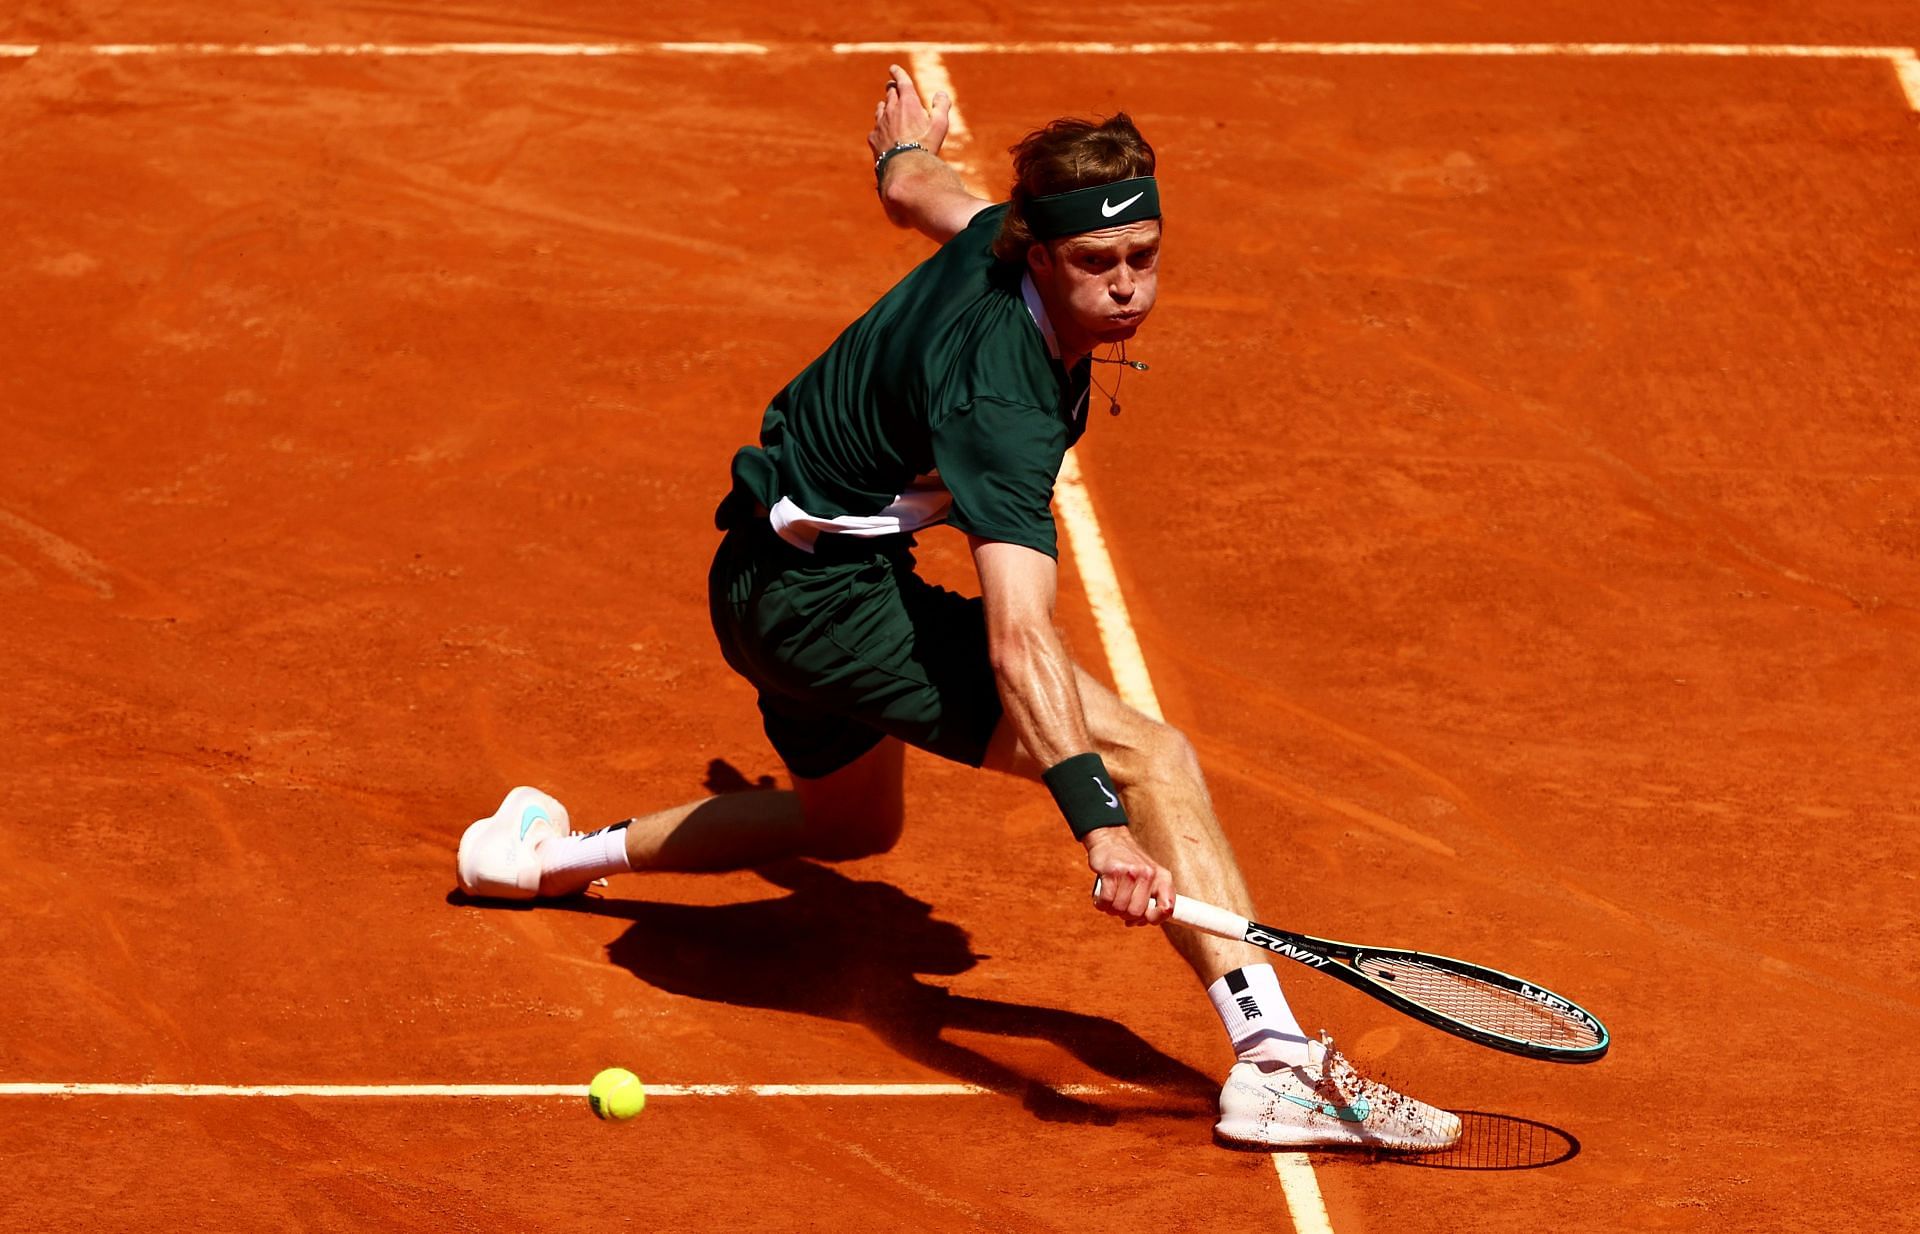 Rublev at the Mutua Madrid Open